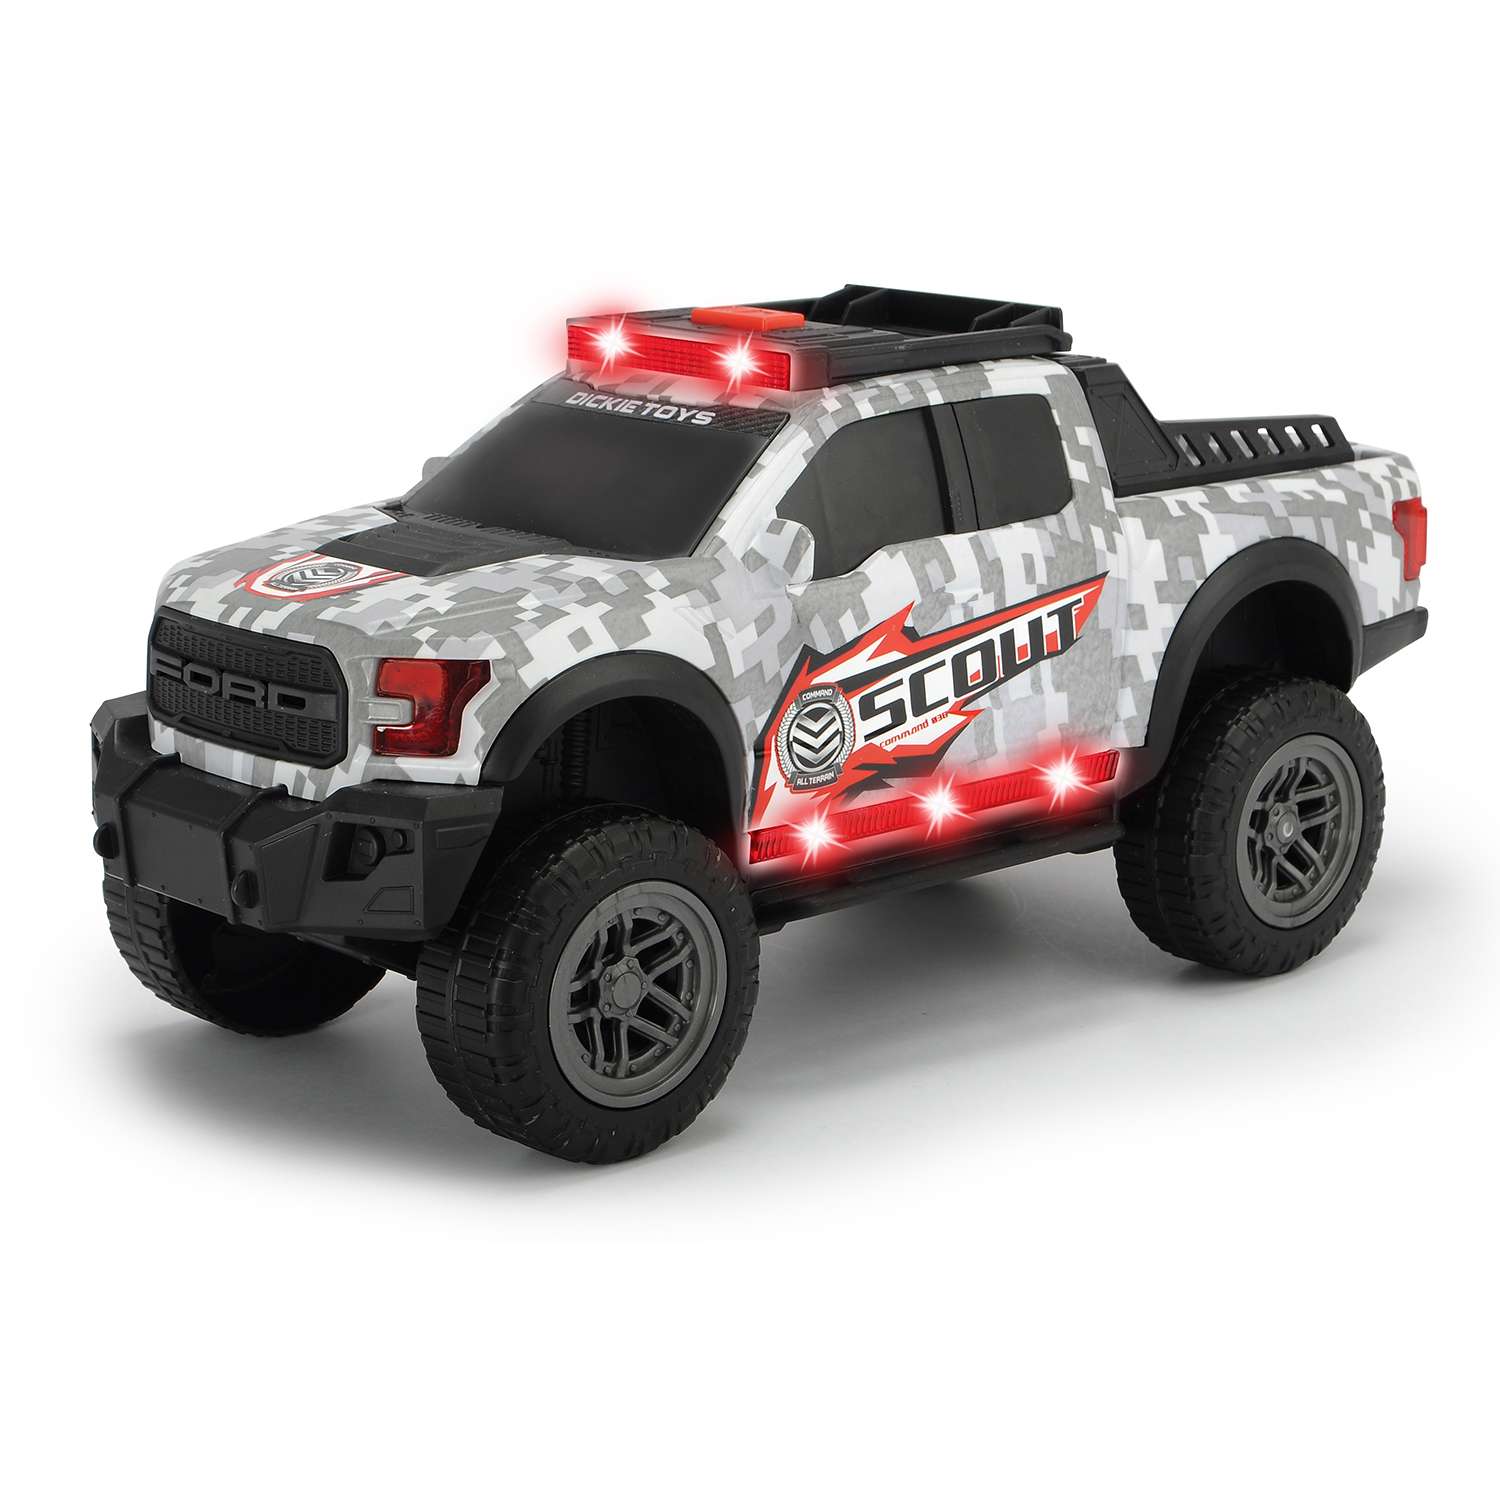 Машинка DICKIE Scout Ford F150 Raptor 33см свет звук 3756000 #3756000 - фото 1